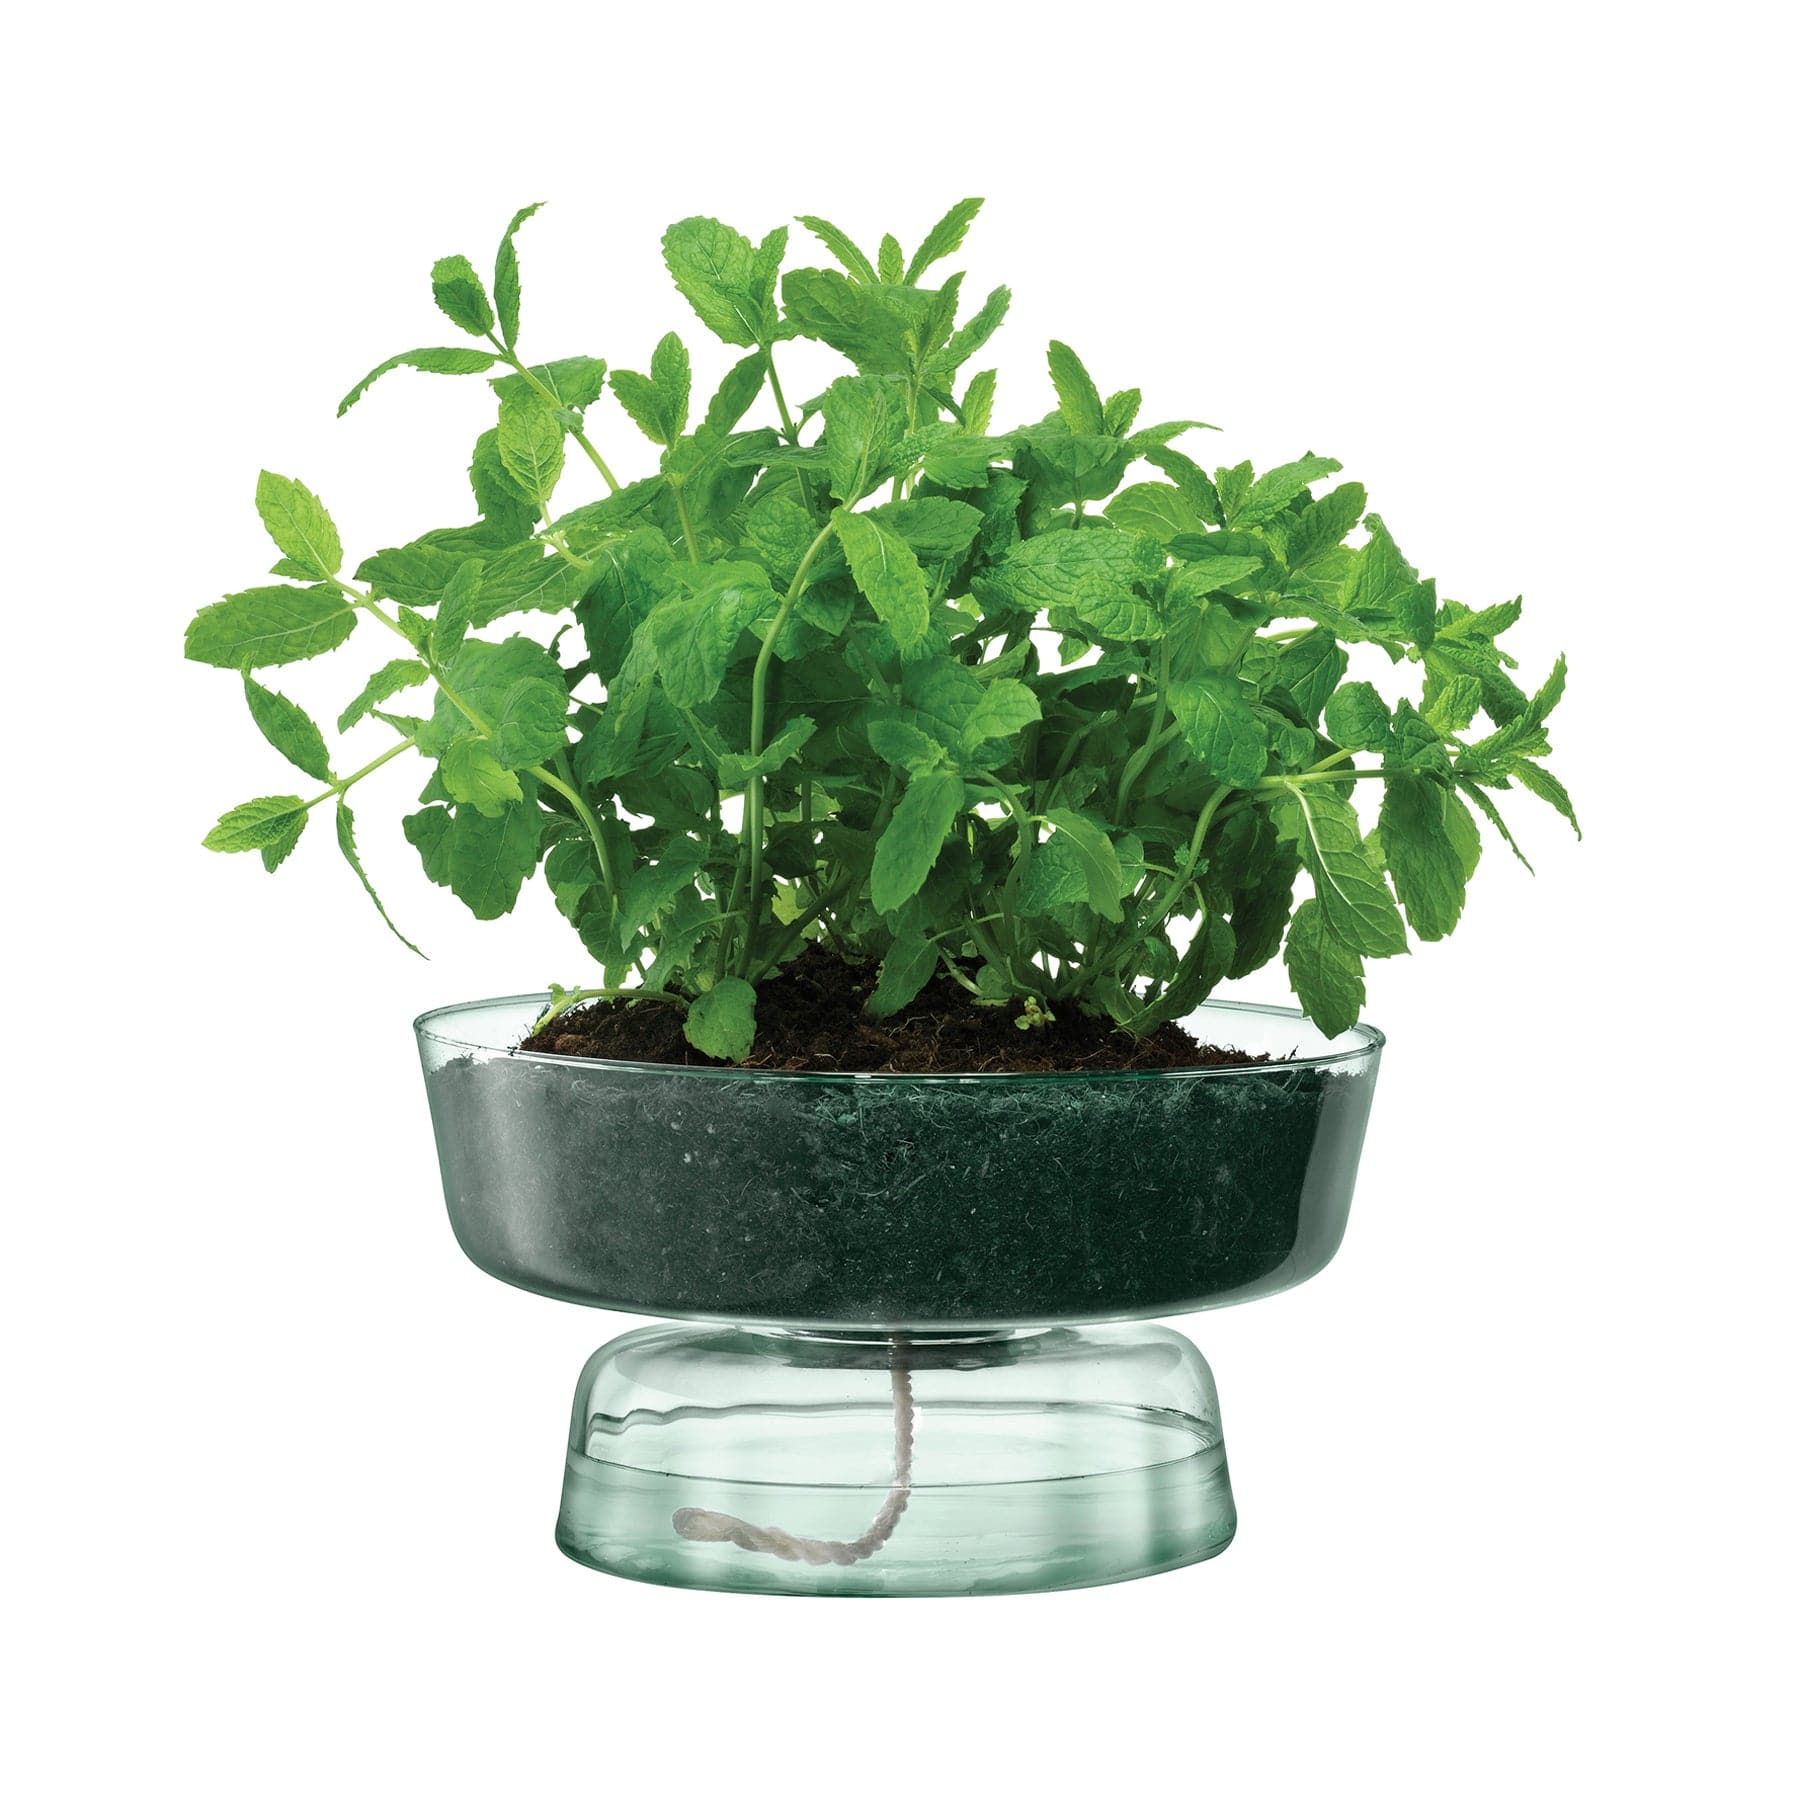 Canopy self watering planter H14.5cm